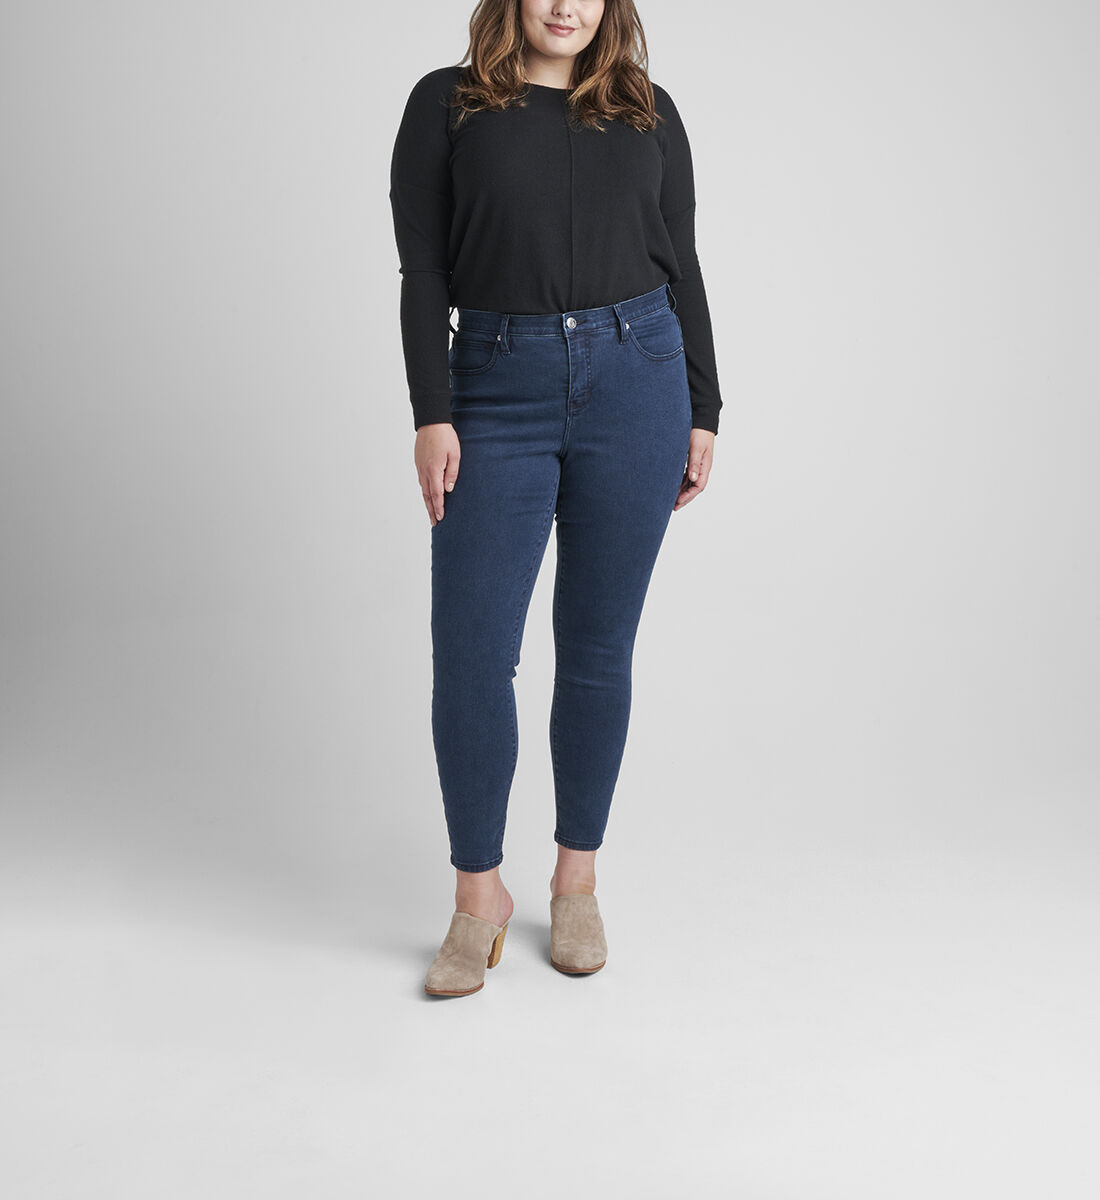 Cecilia High Rise Skinny Jeans Plus Size Front